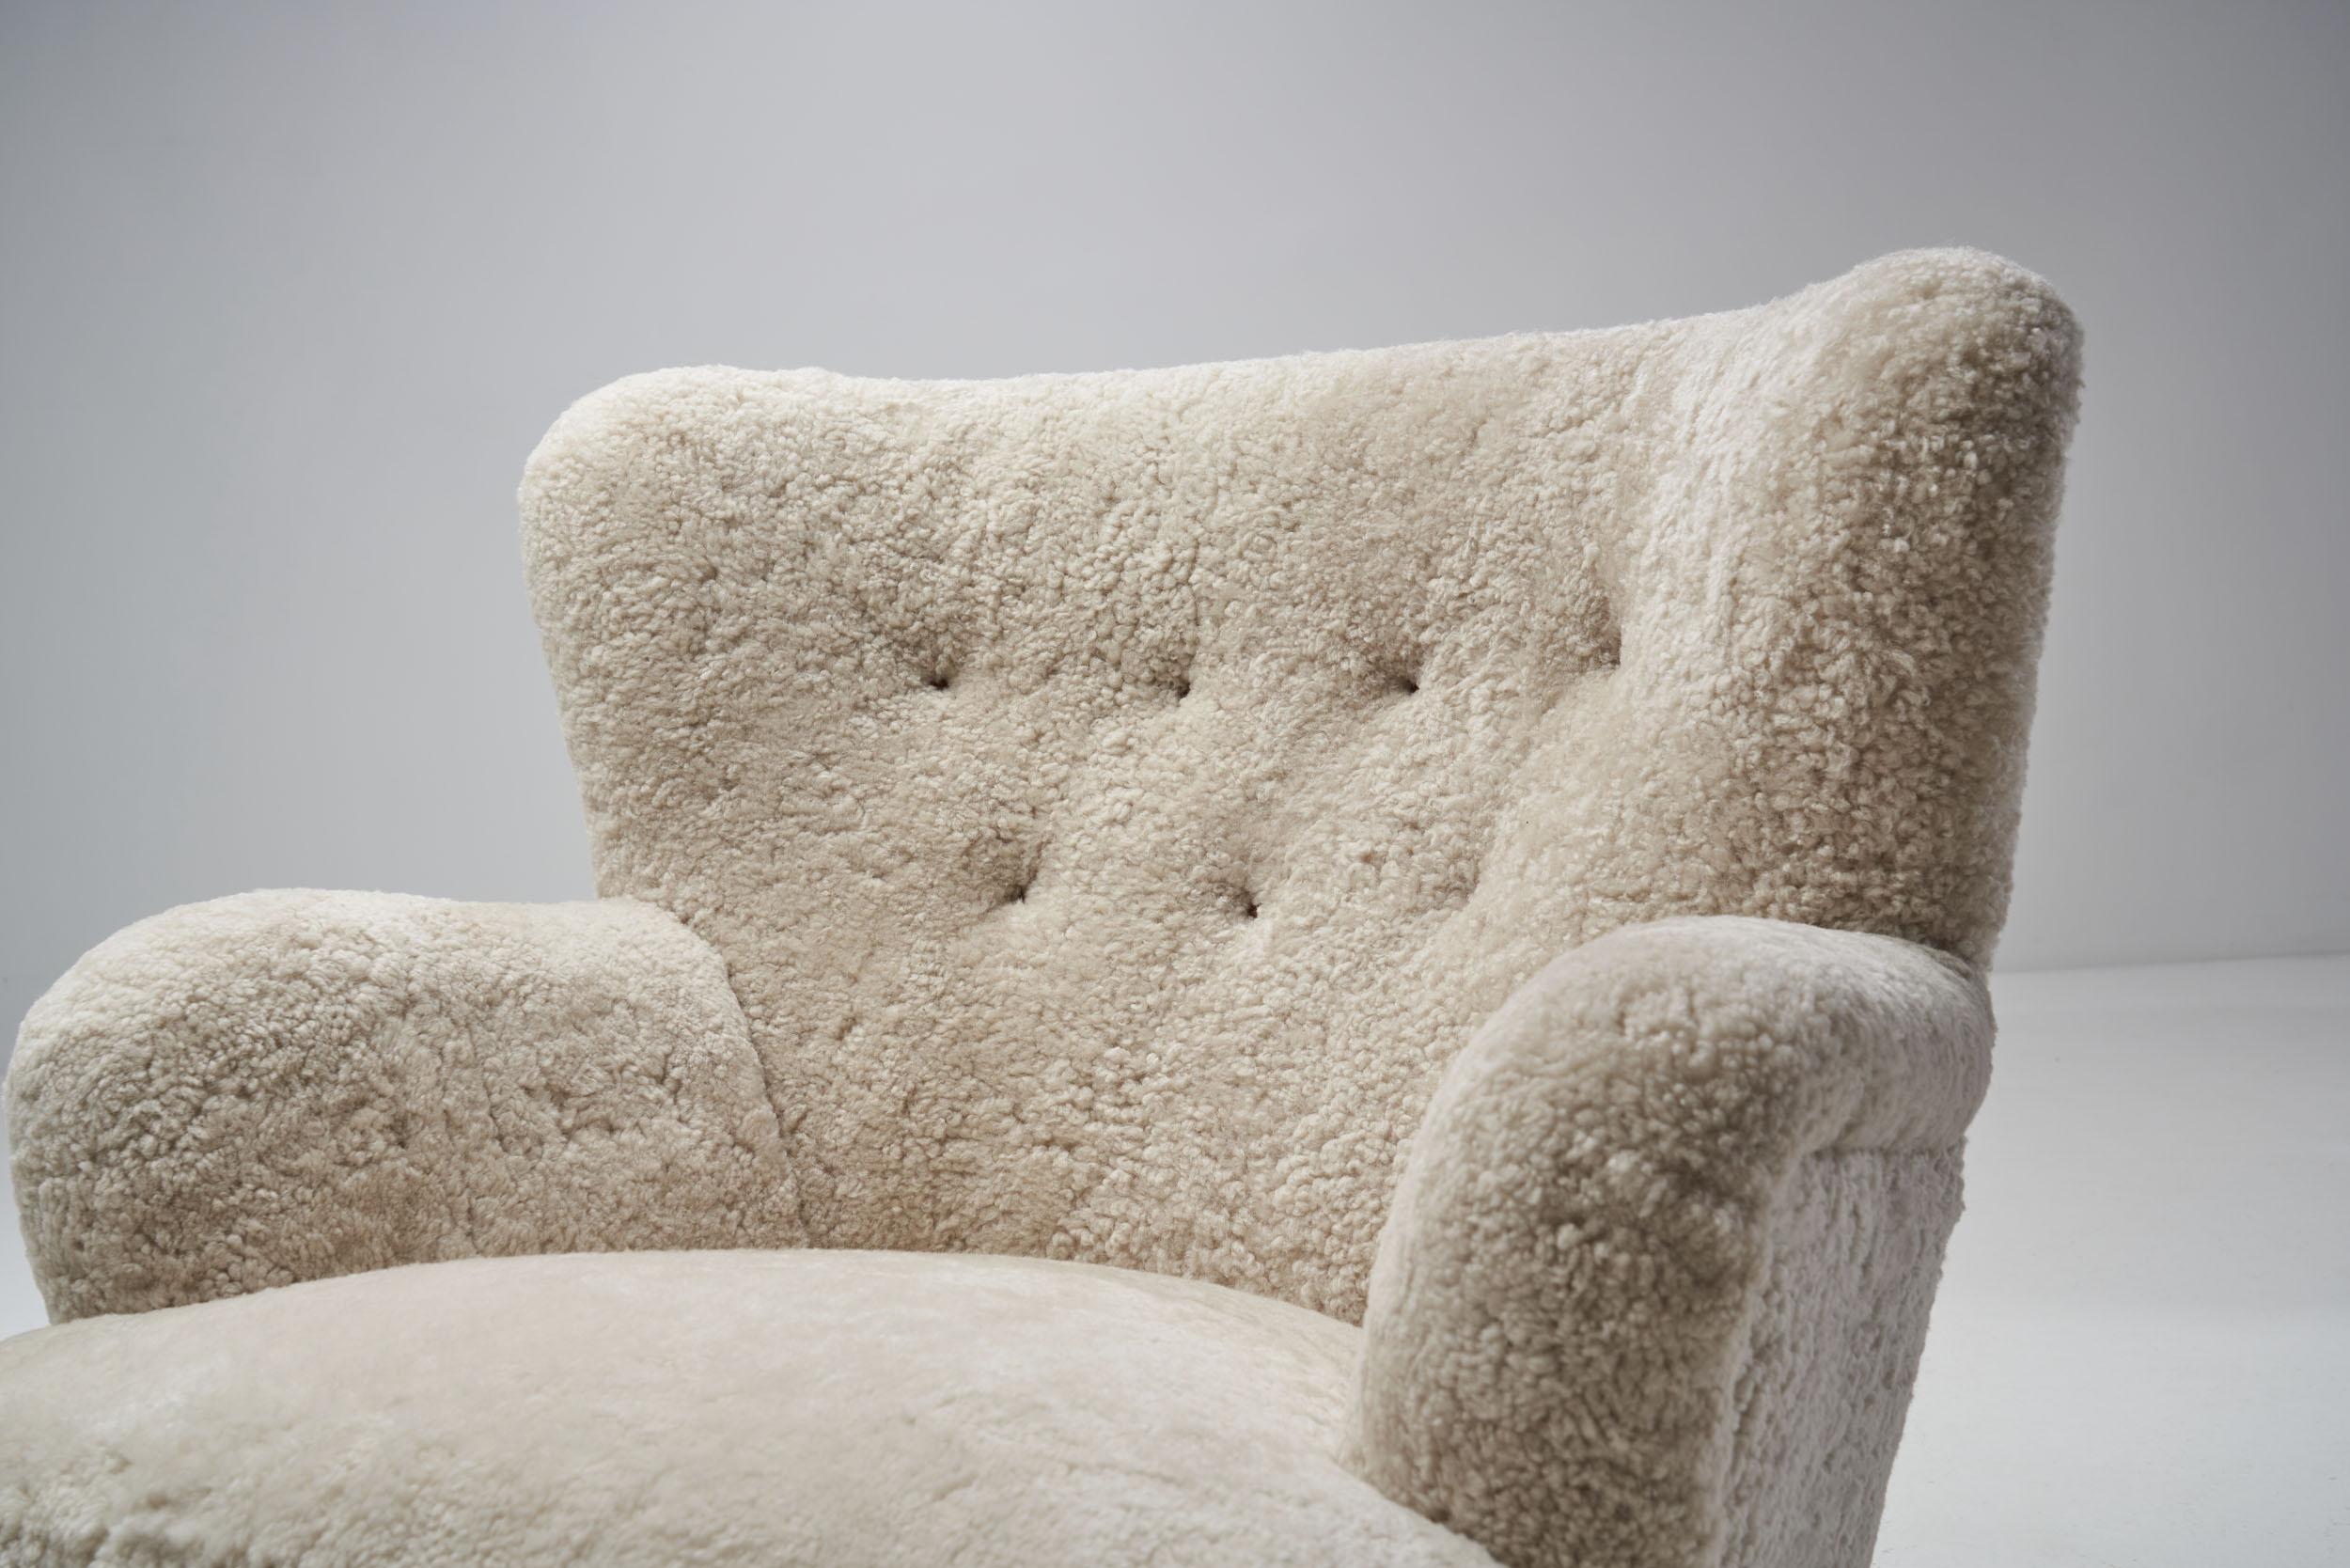 Pair of “Laila” Armchairs in Sheepskin by Ilmari Lappalainen, Finland 1948 For Sale 2